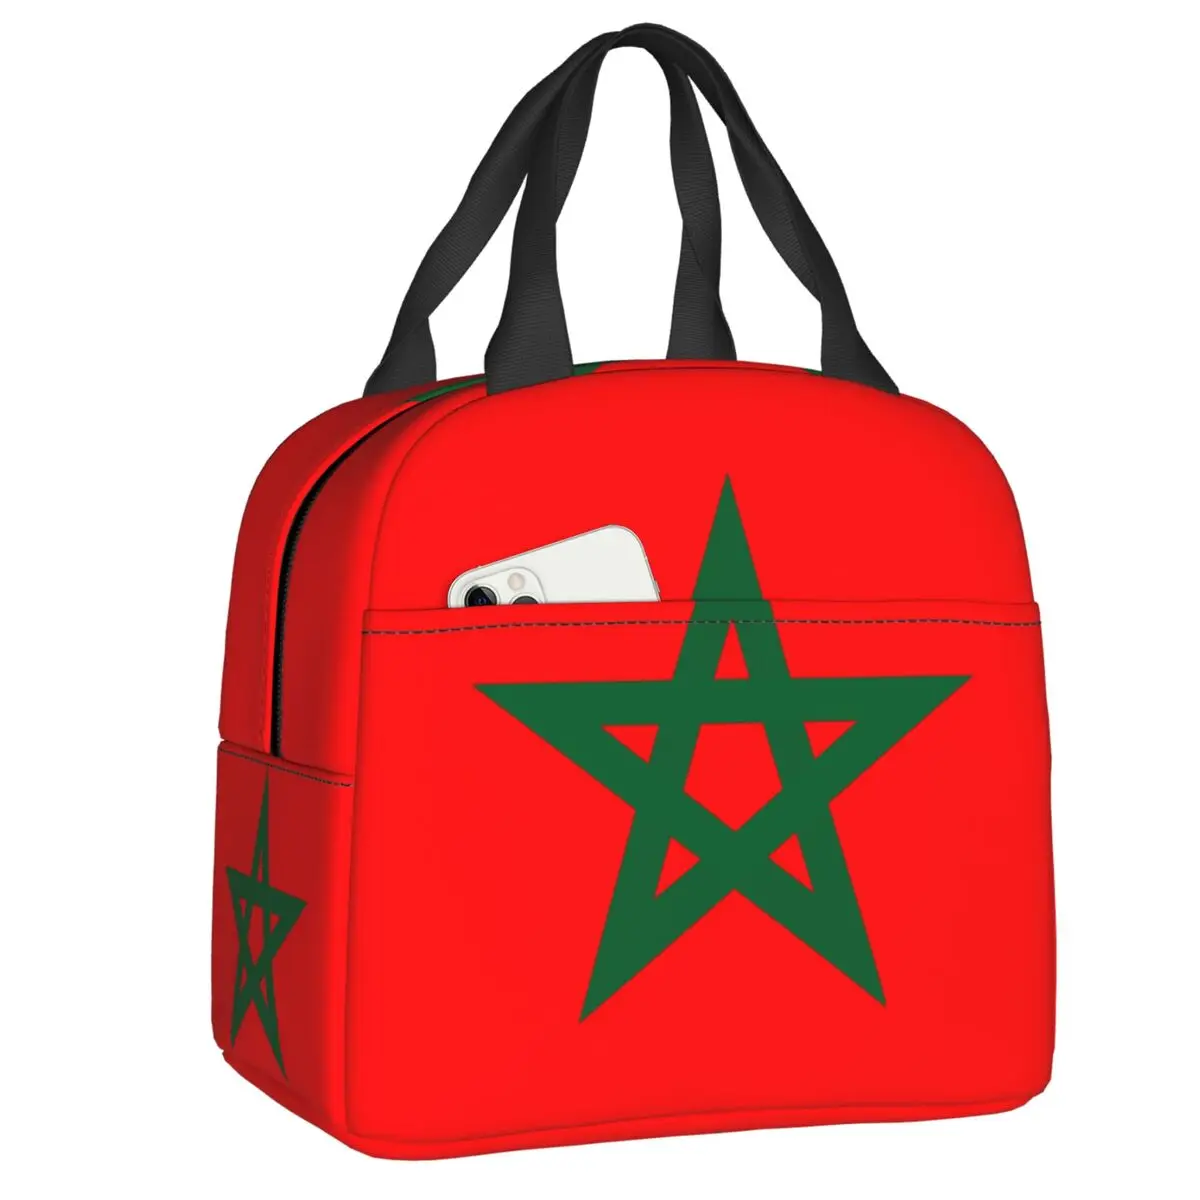 Morocco Flag Lunch Bag Men Women Moroccan Patriotic Cooler Thermal Insulated Lunch Box for Kids School Children Food Bags